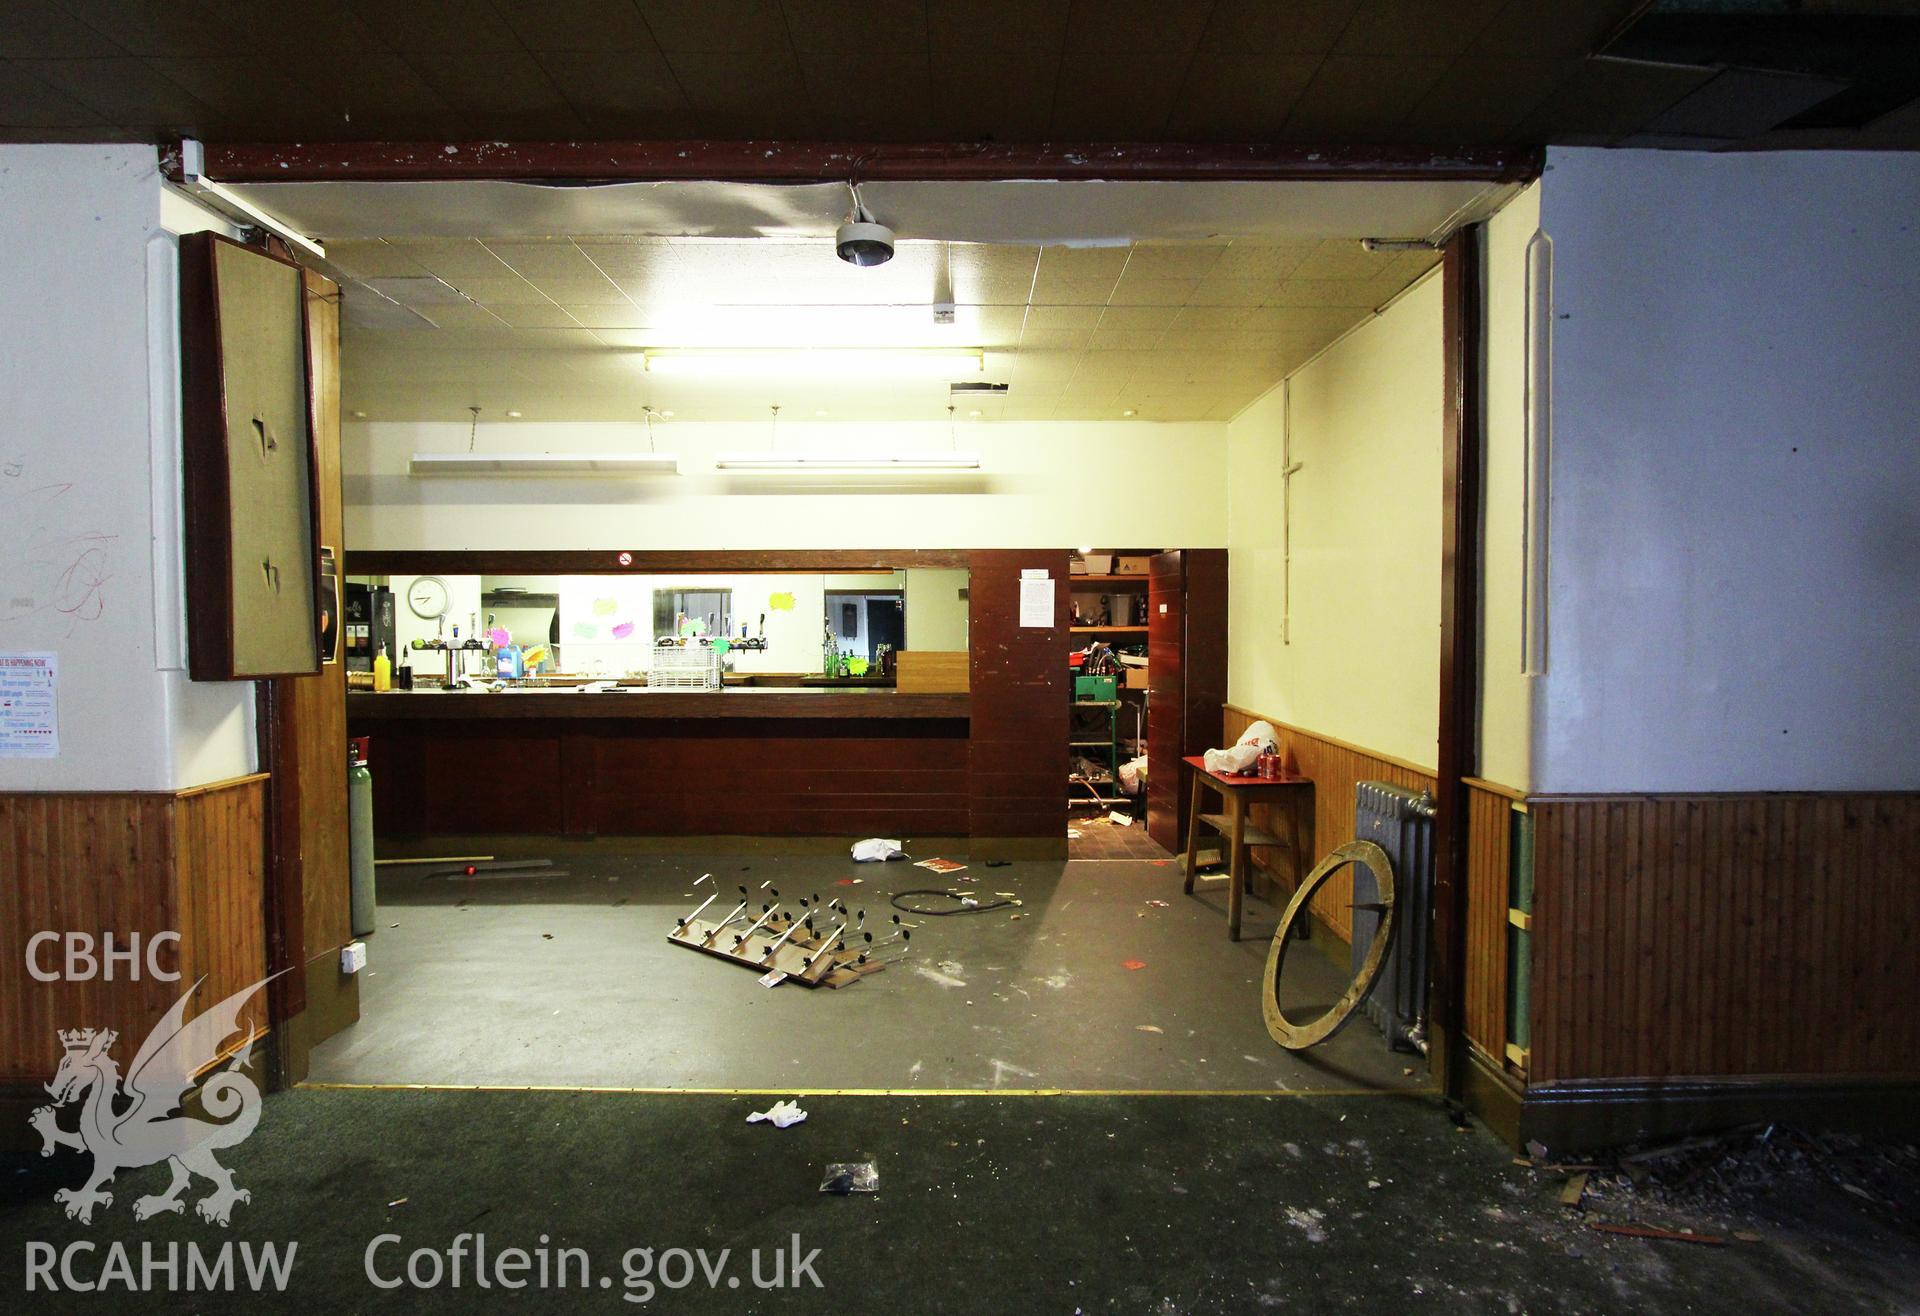 Interior view of bar at the Railway Institute, Bangor. Photographed during survey conducted by Sue Fielding for the RCAHMW on 4th April 2016.